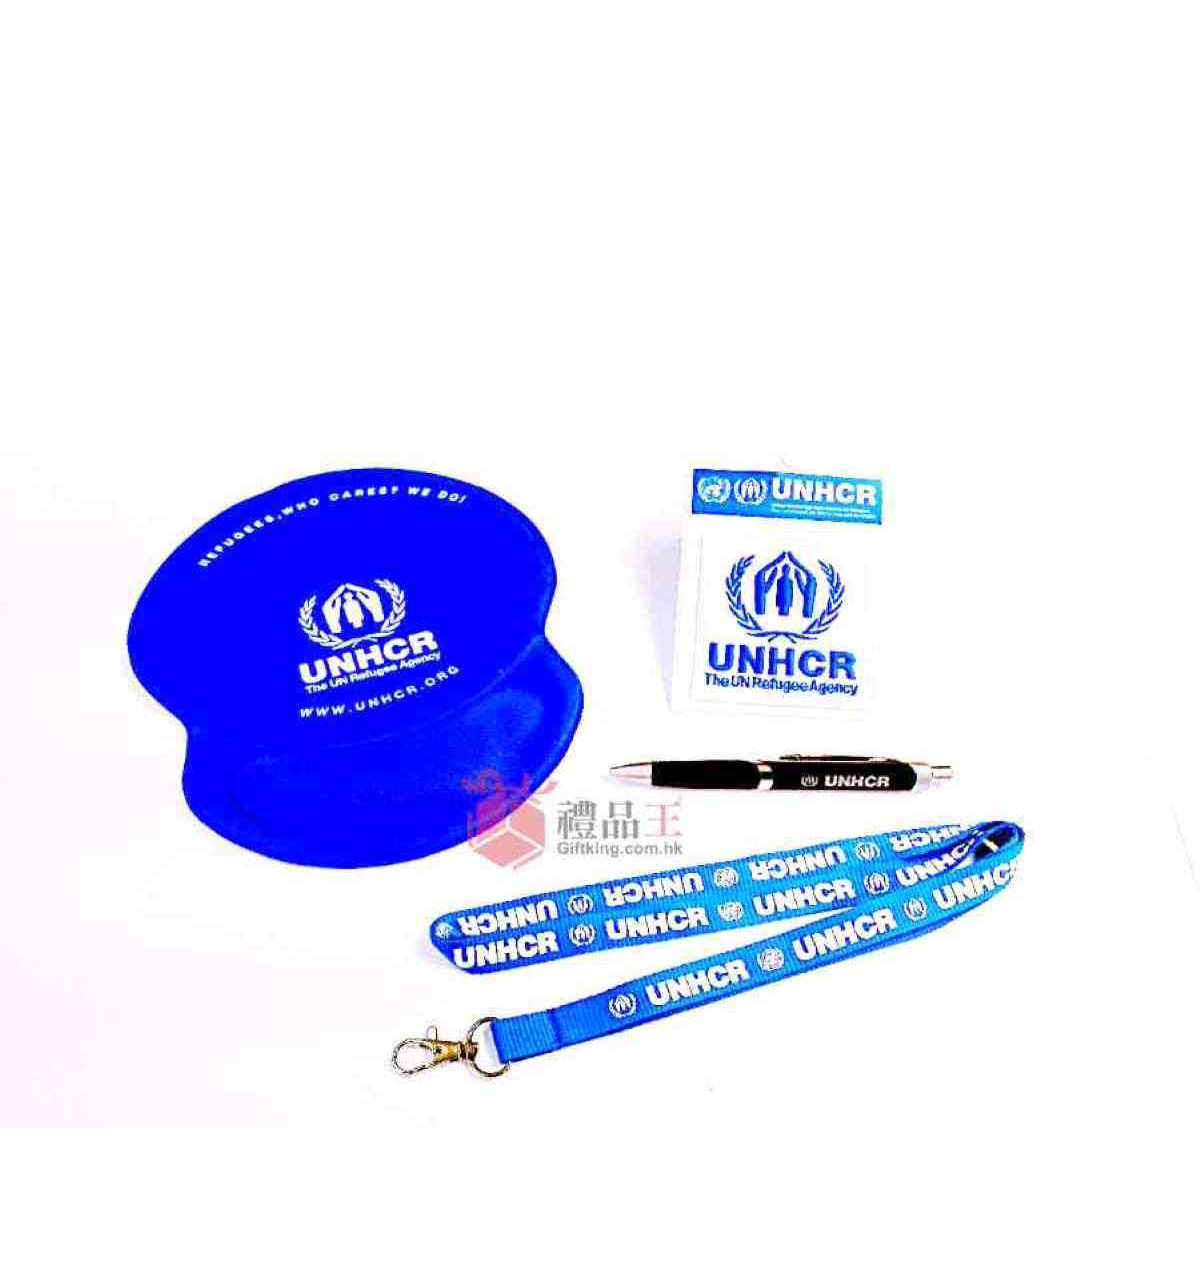 UNHCR - Gift set (Stationery and Advertising gifts)